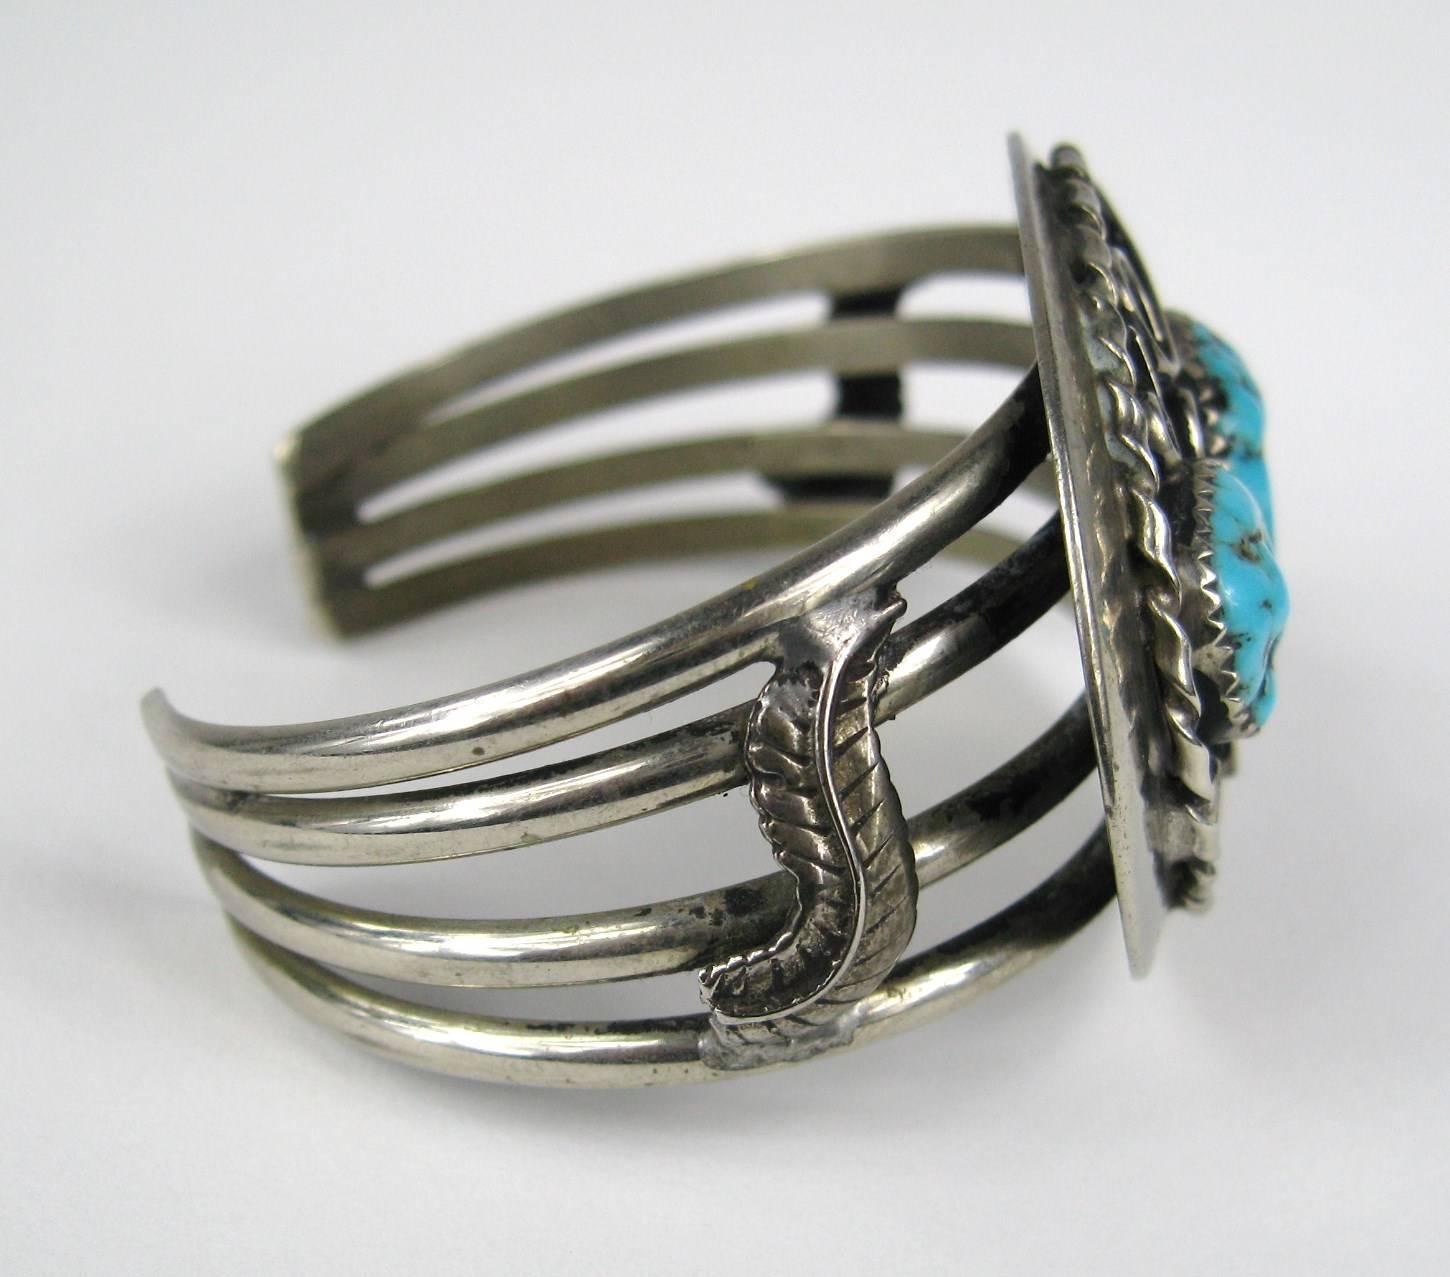 Navajo old pawn Sterling Silver Cuff. 3 Large Turquoise Nugget. 4 Wire Cuff . Hallmarked R.V. Measuring 1.50 in top to bottom x 2.18 in wide  with 1.09 in  opening - Will fit a 6 to 7 in wrist and has a bit of give since sterling is pliable. This is